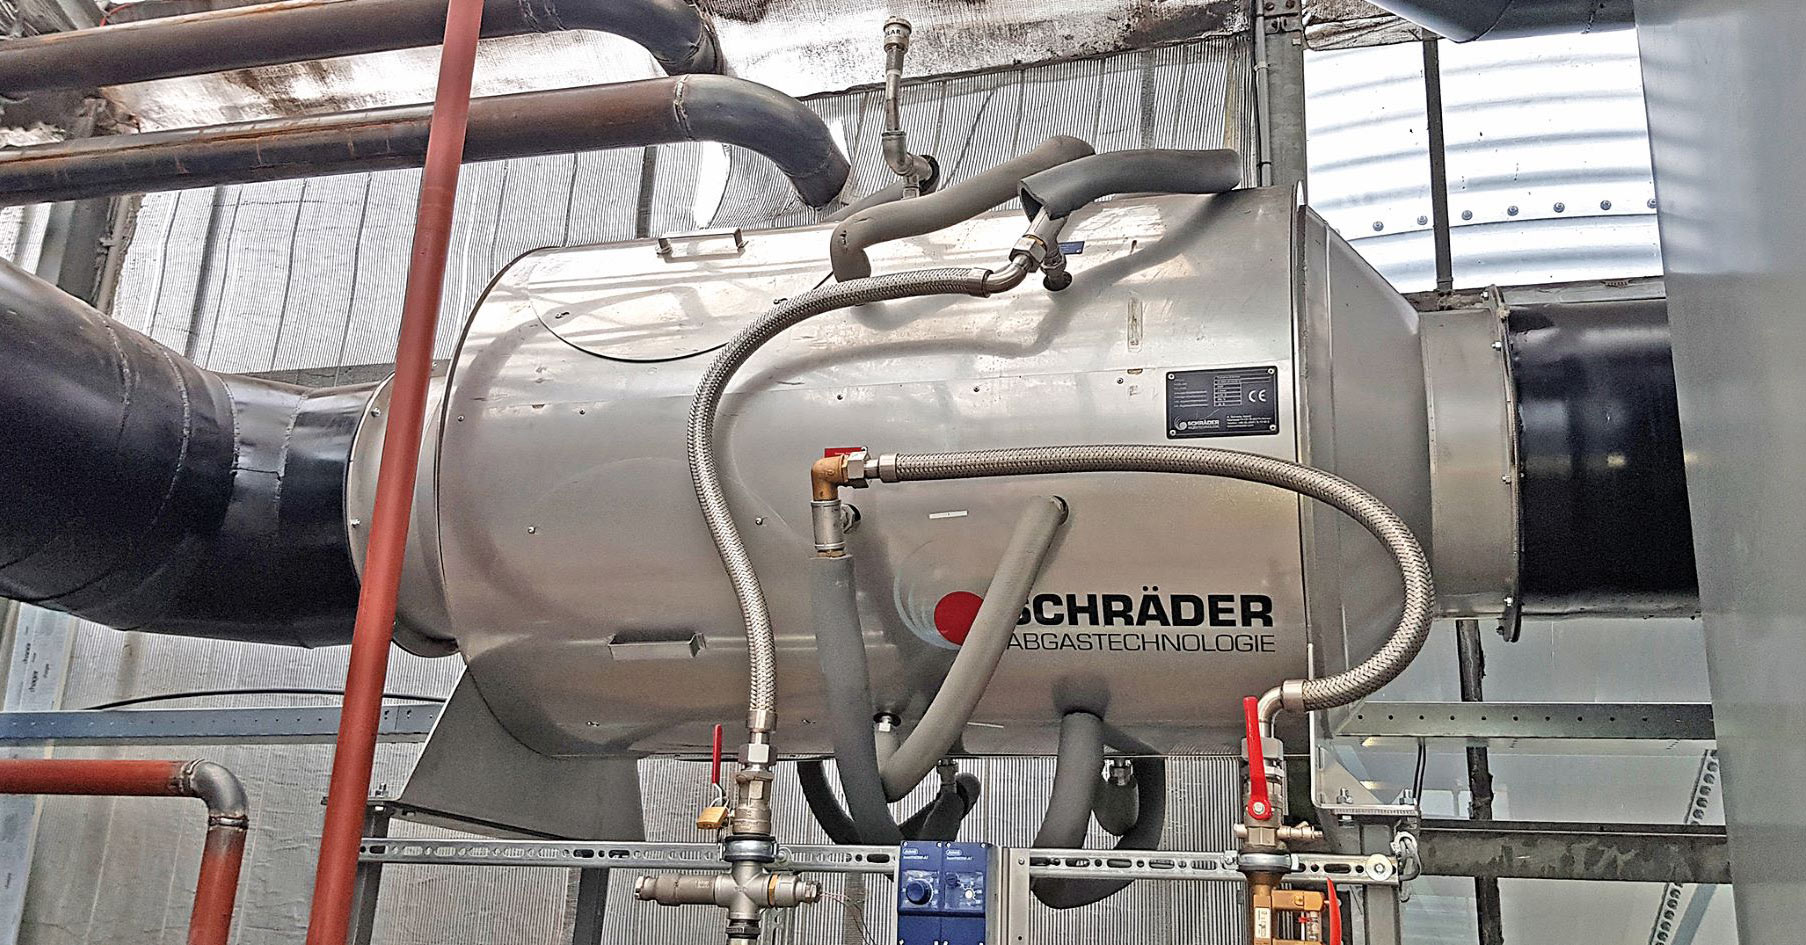 Exhaust gas heat recovery in a small space: Schrader’s ThermTube